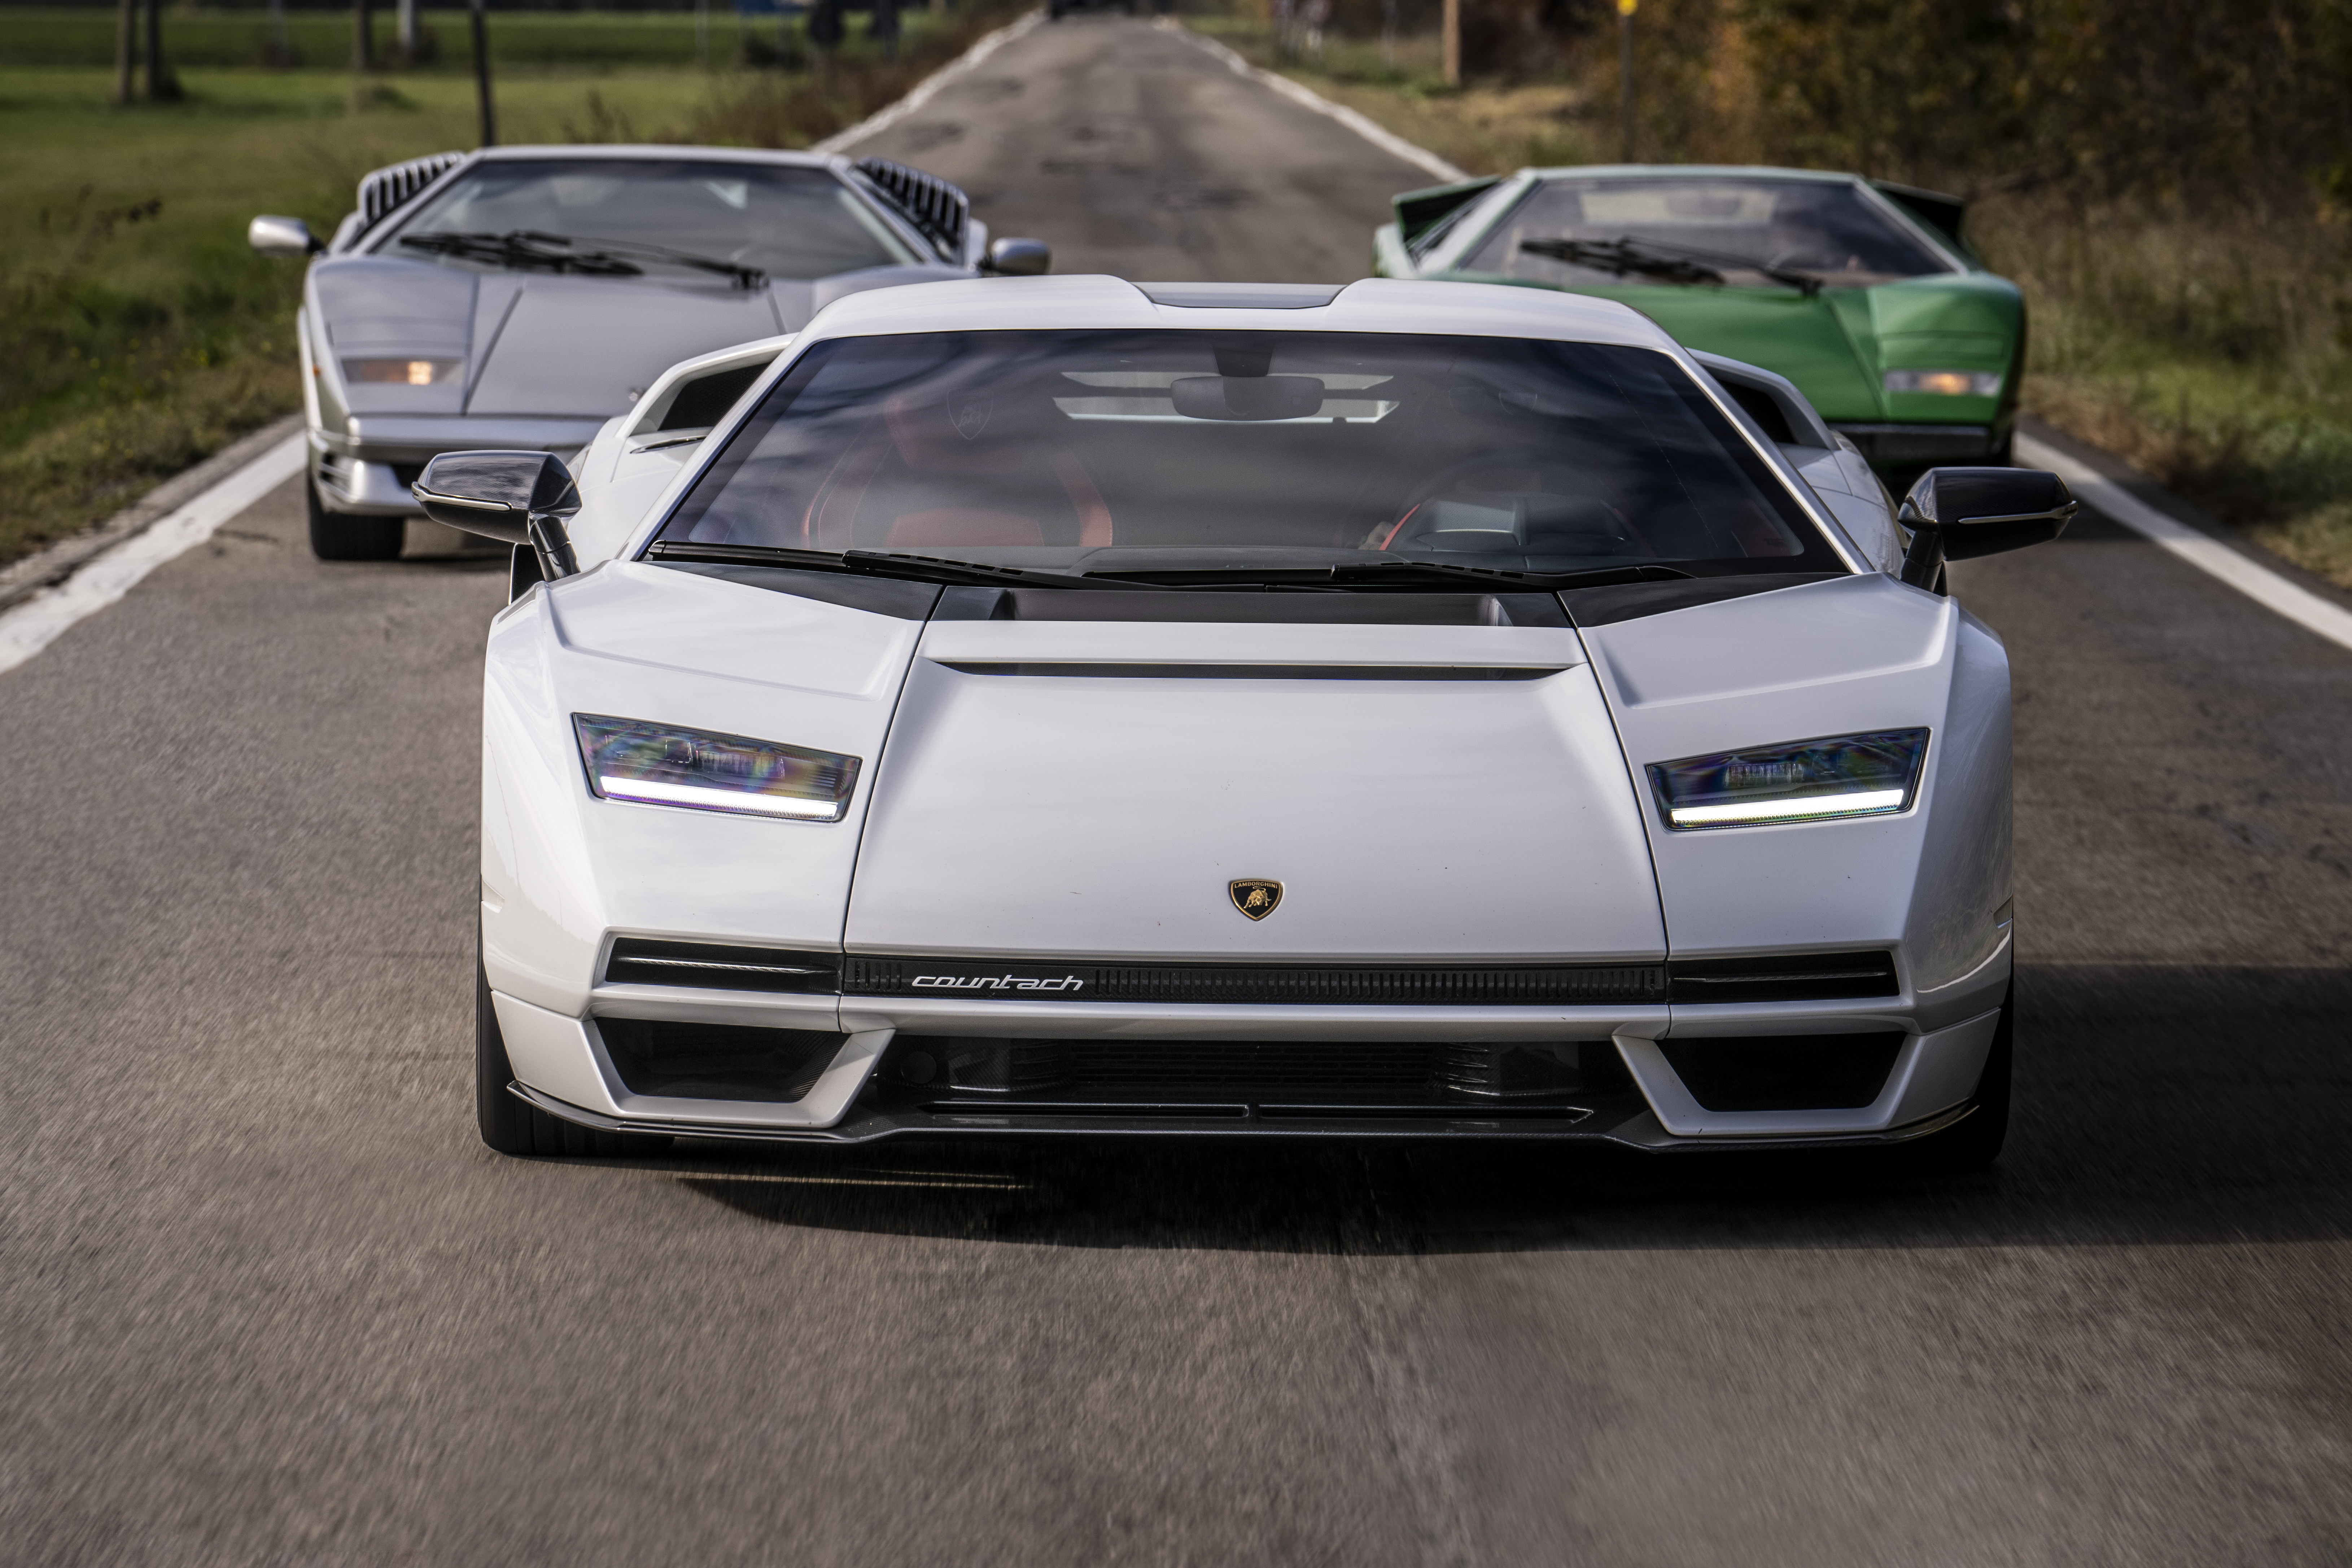 Lamborghini Countach LP1 800-4 Hits the Road for the First Time